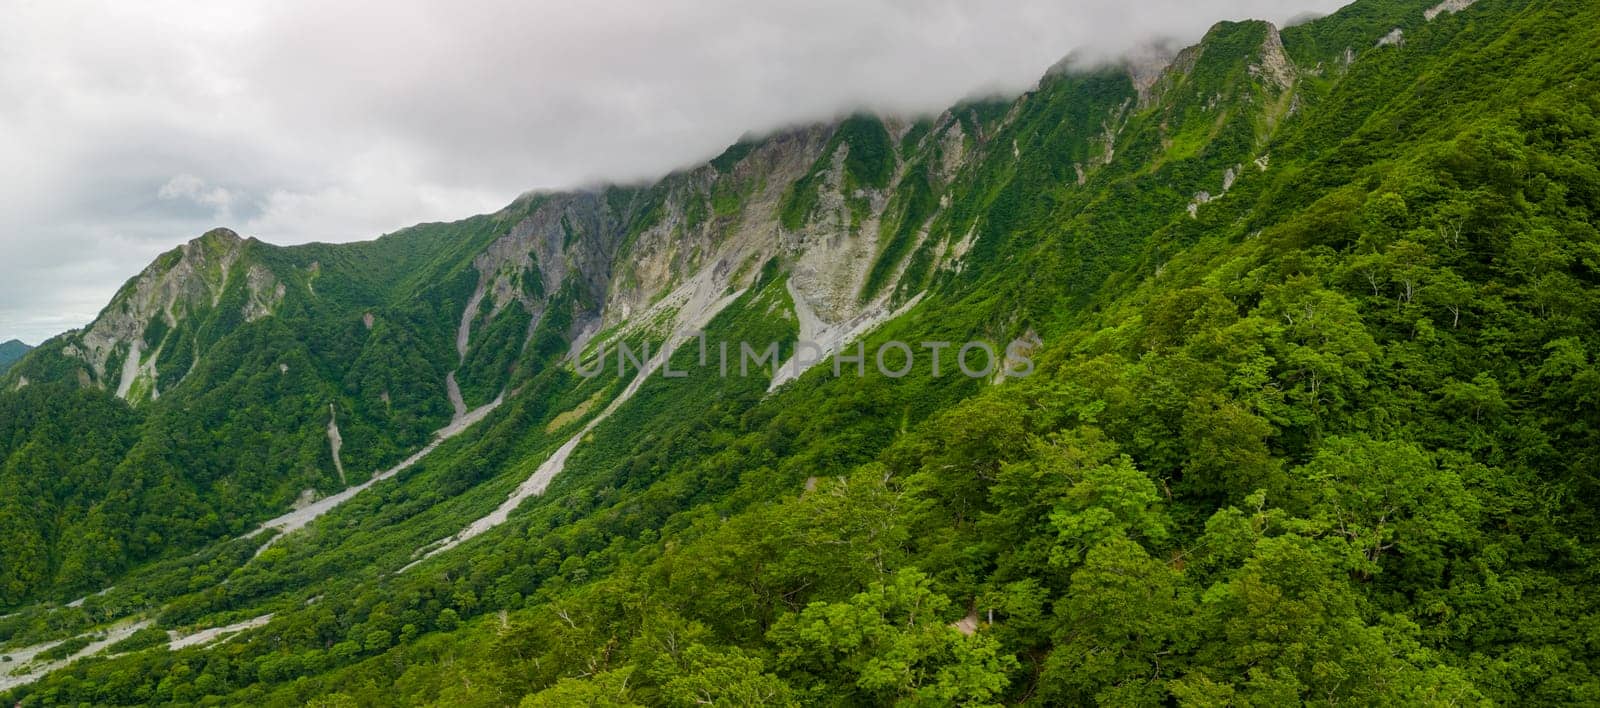 View of rock landslides on steep forested slope of volcanic mountain. High quality photo